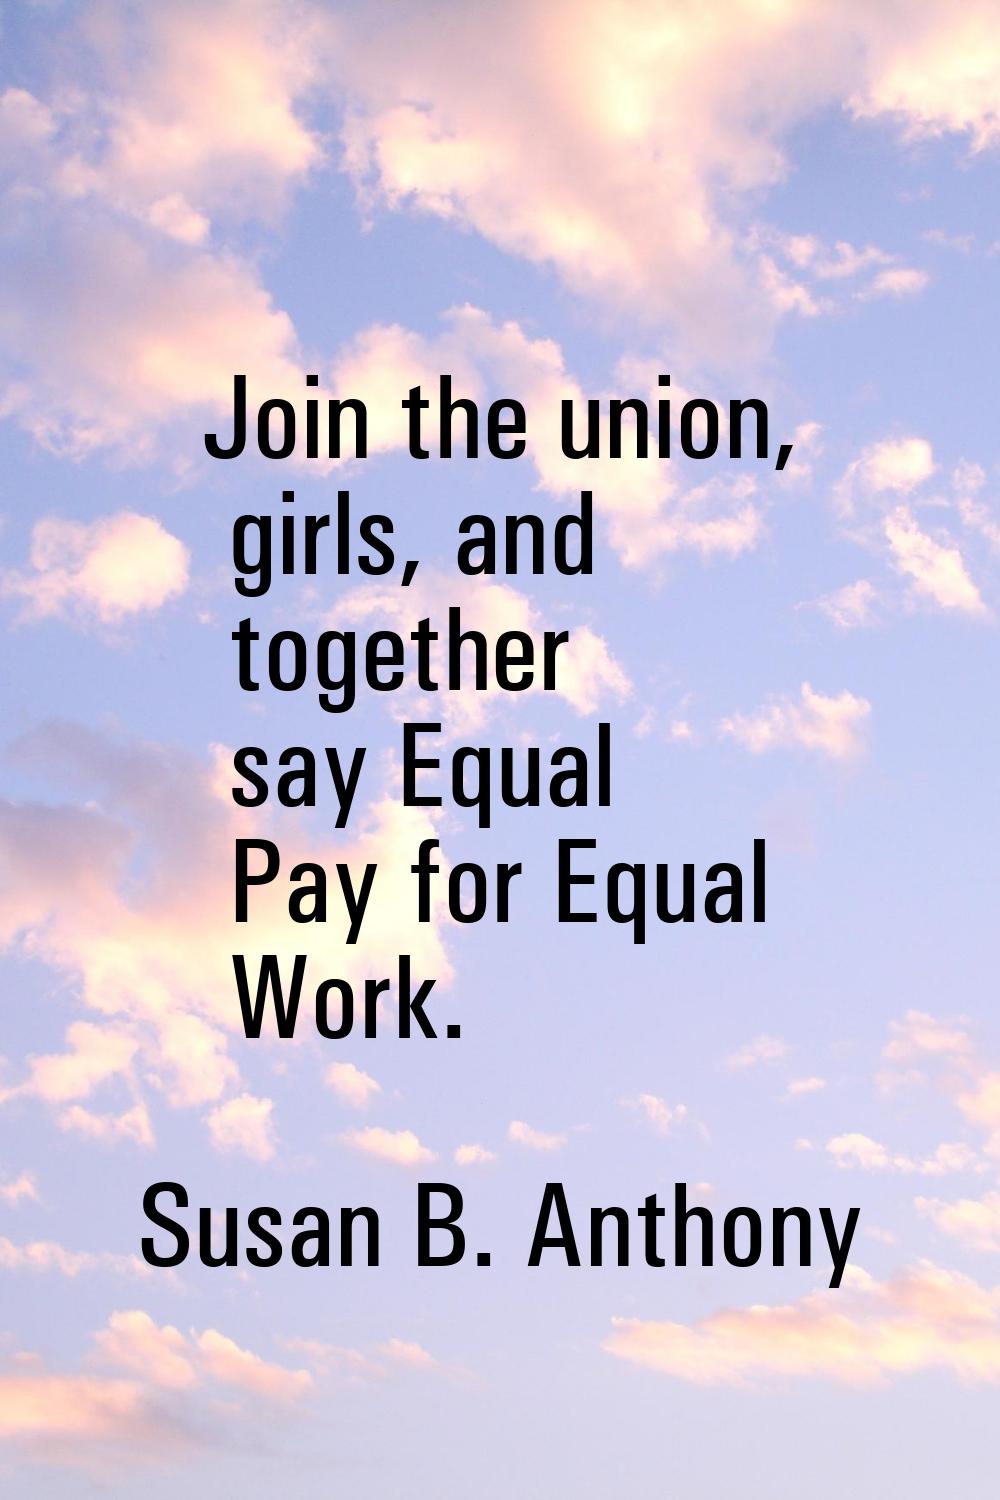 Join the union, girls, and together say Equal Pay for Equal Work.